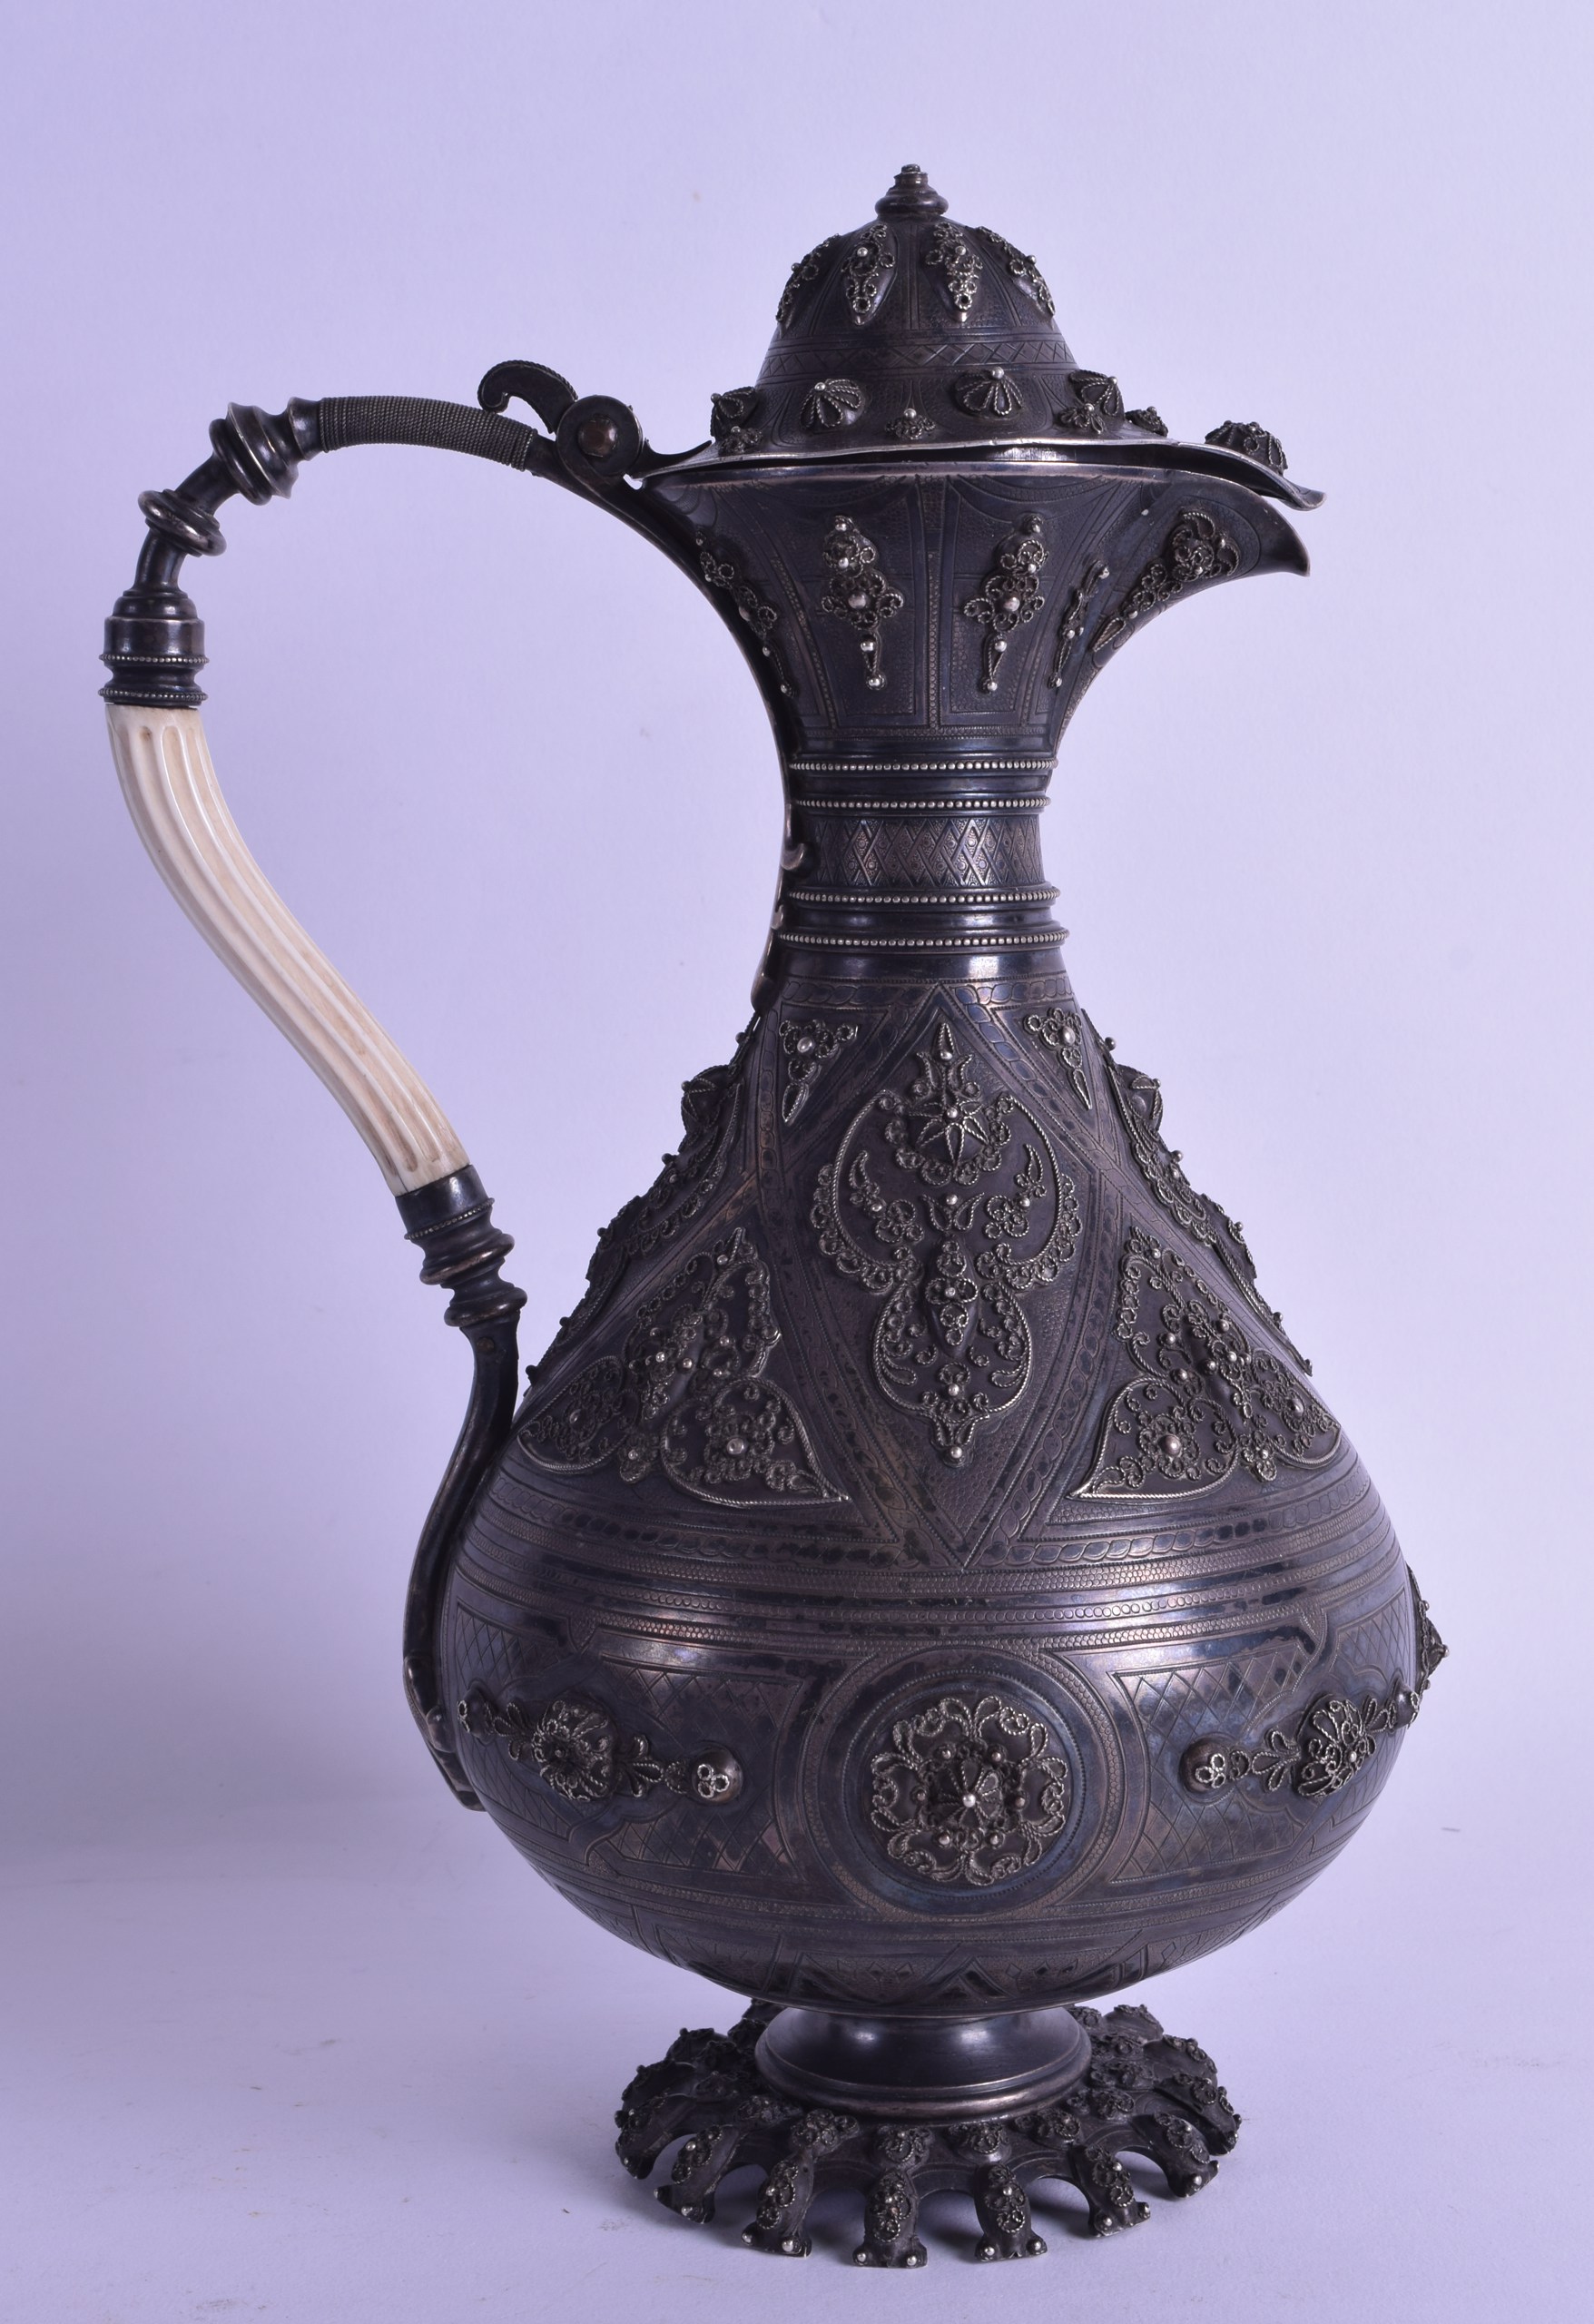 A FINE 18TH/19TH CENTURY PERSIAN/OTTOMAN SILVER EWER with scrolling ivory handle, decorated with